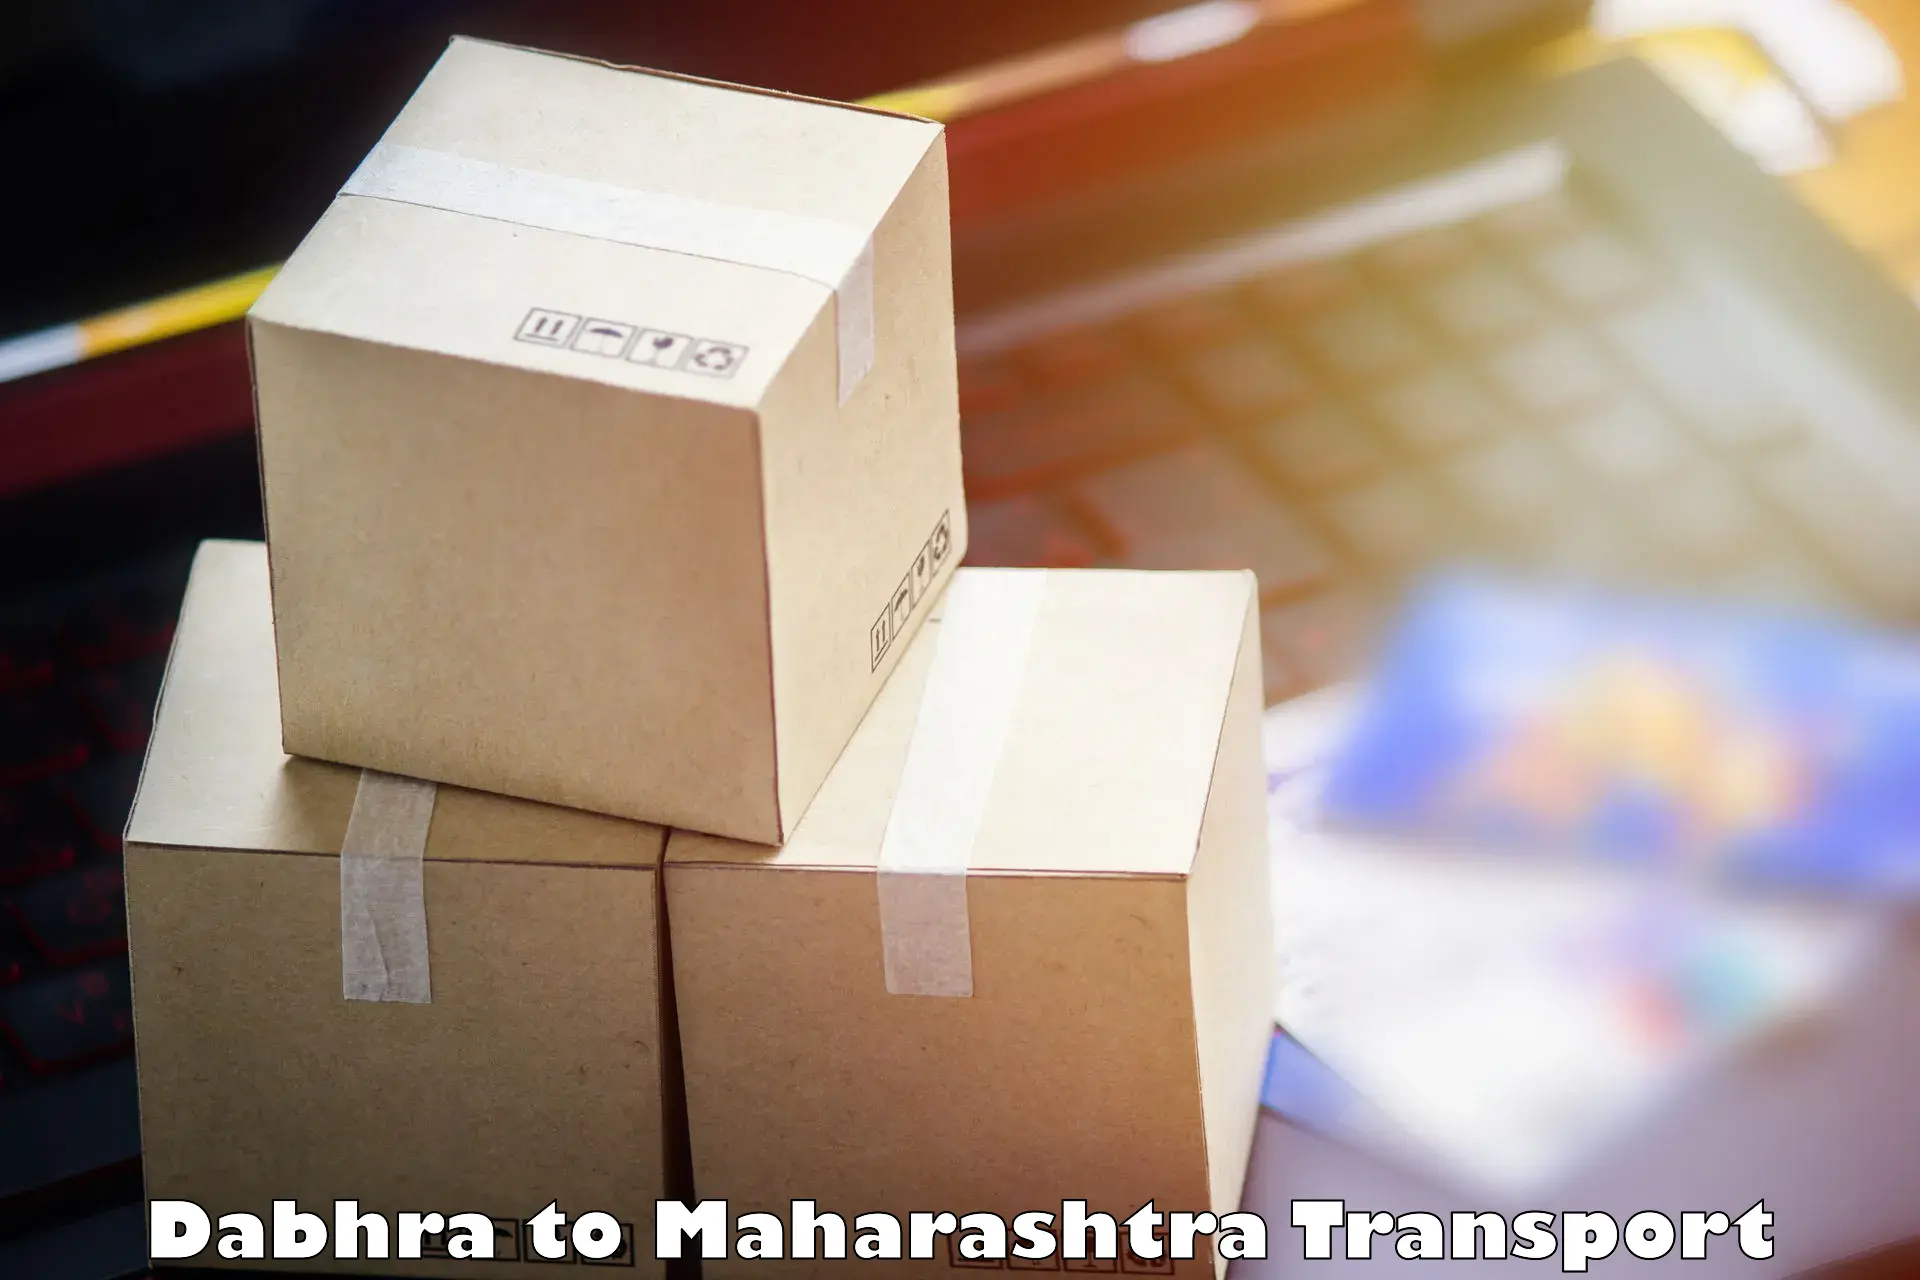 Commercial transport service Dabhra to Baramati